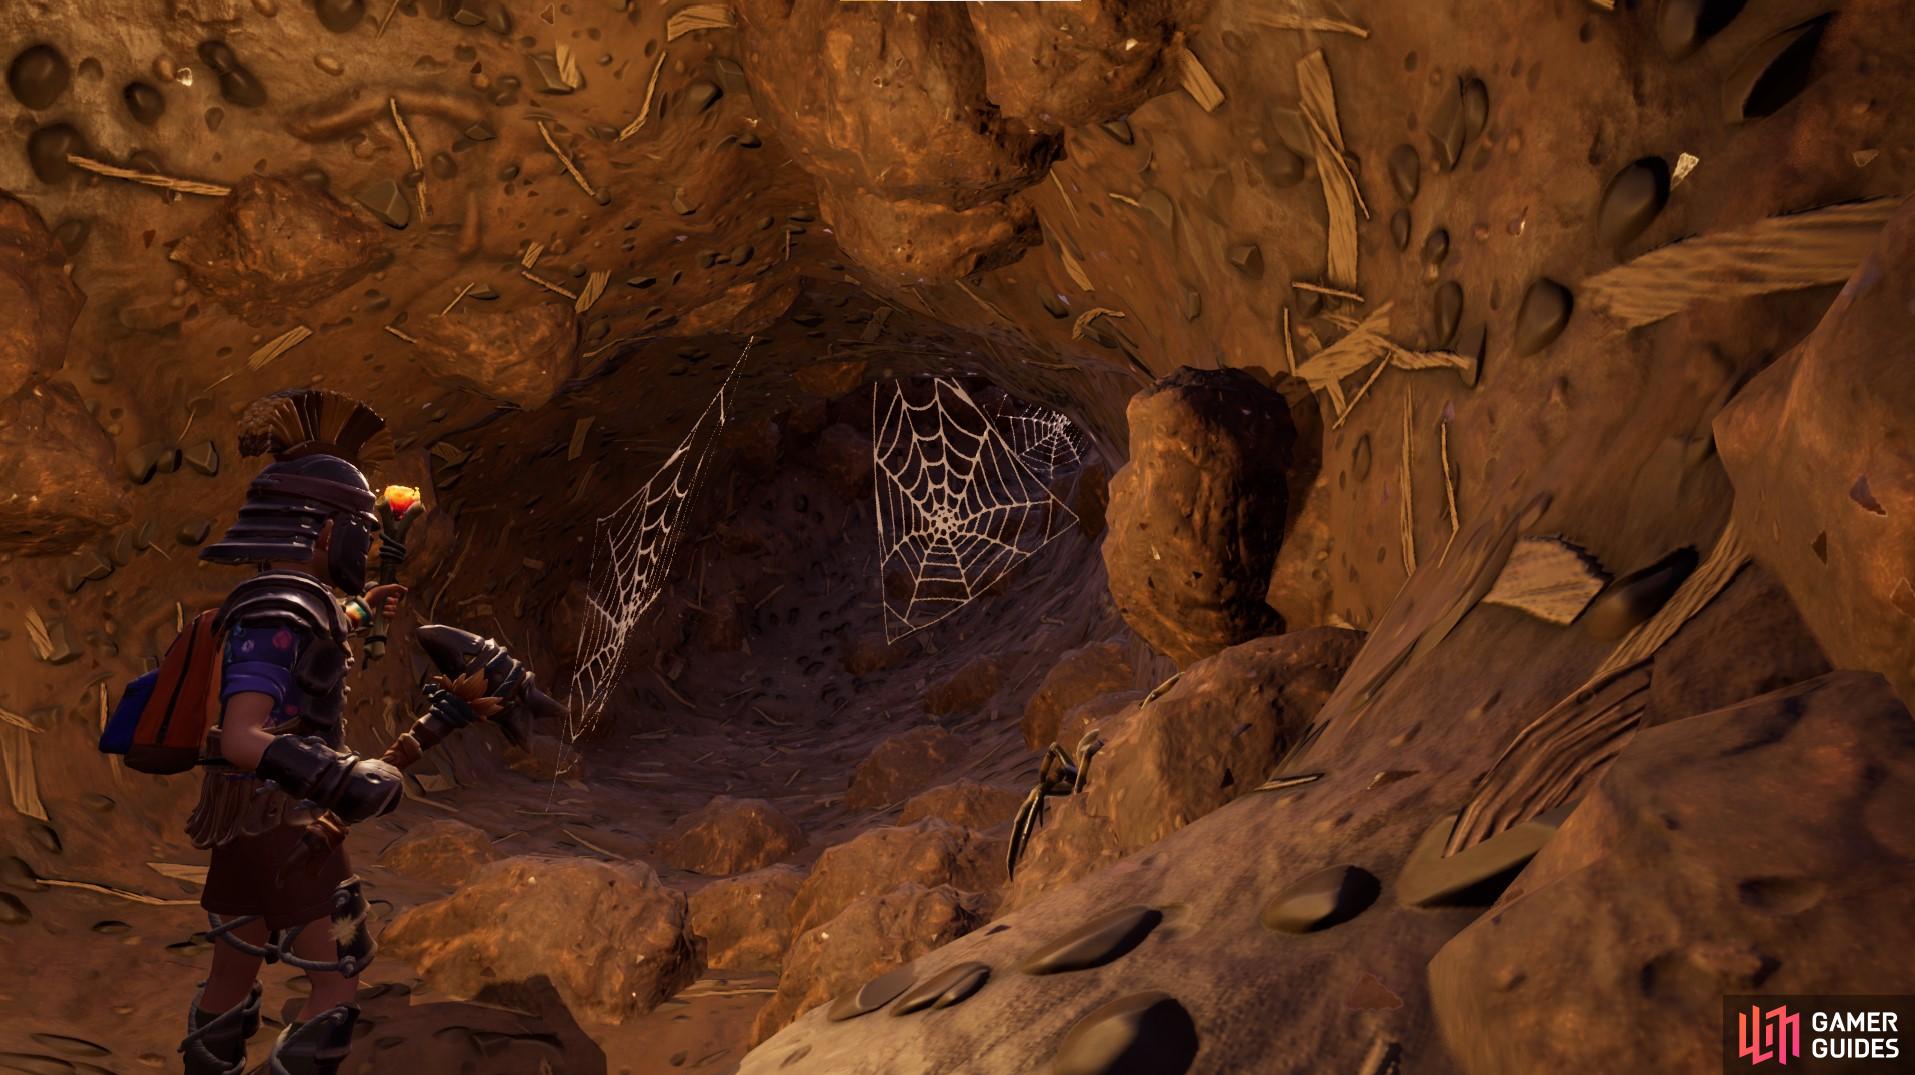 Here is the entrance to the Toolbox black widow location via the trench.